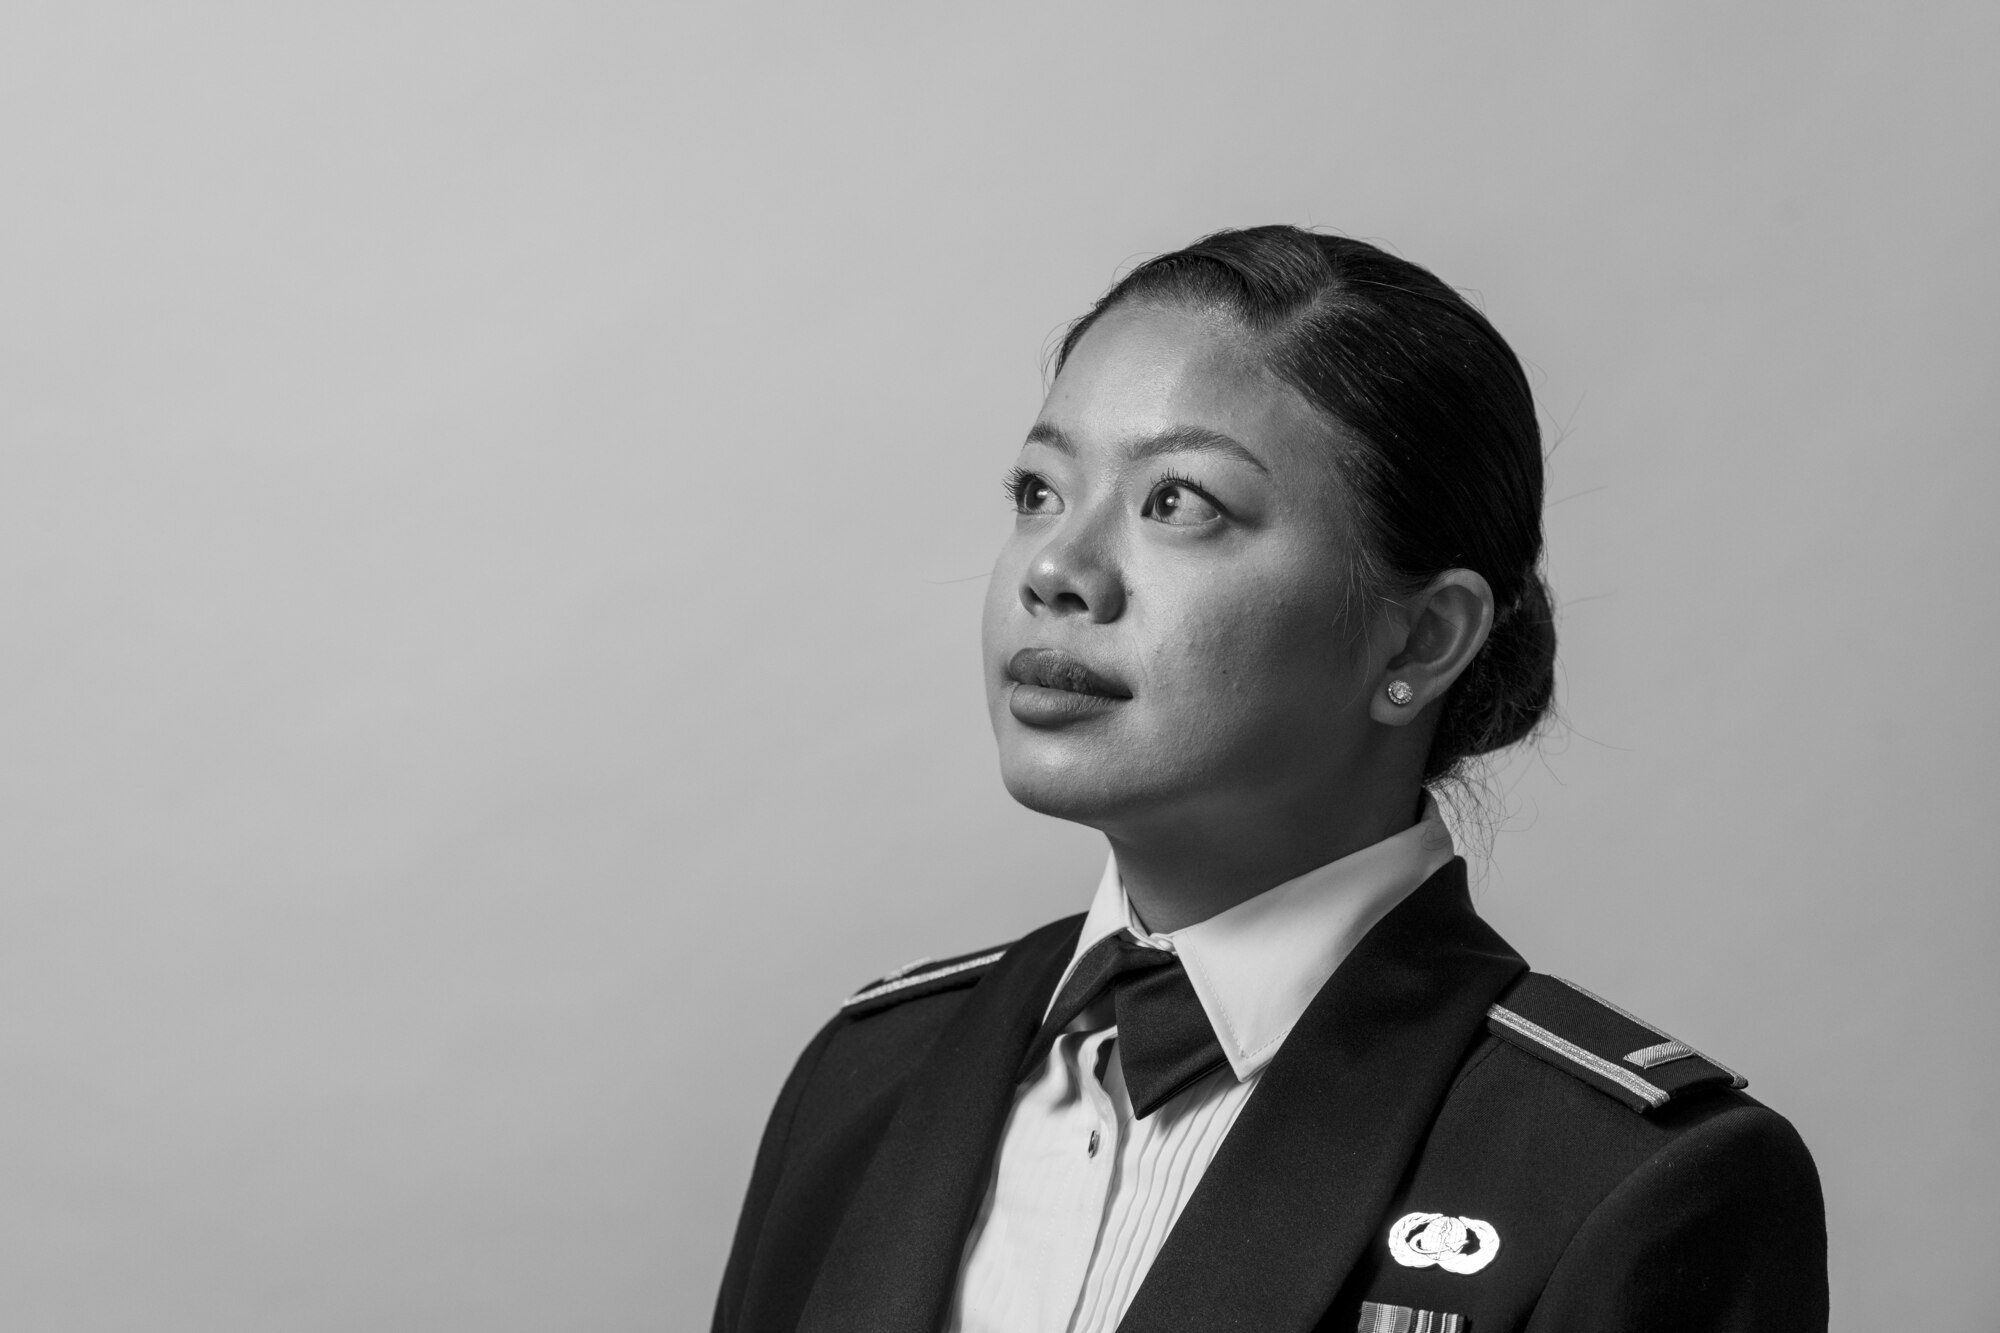 A woman in a ceremonial military uniform stands in front of a white background.